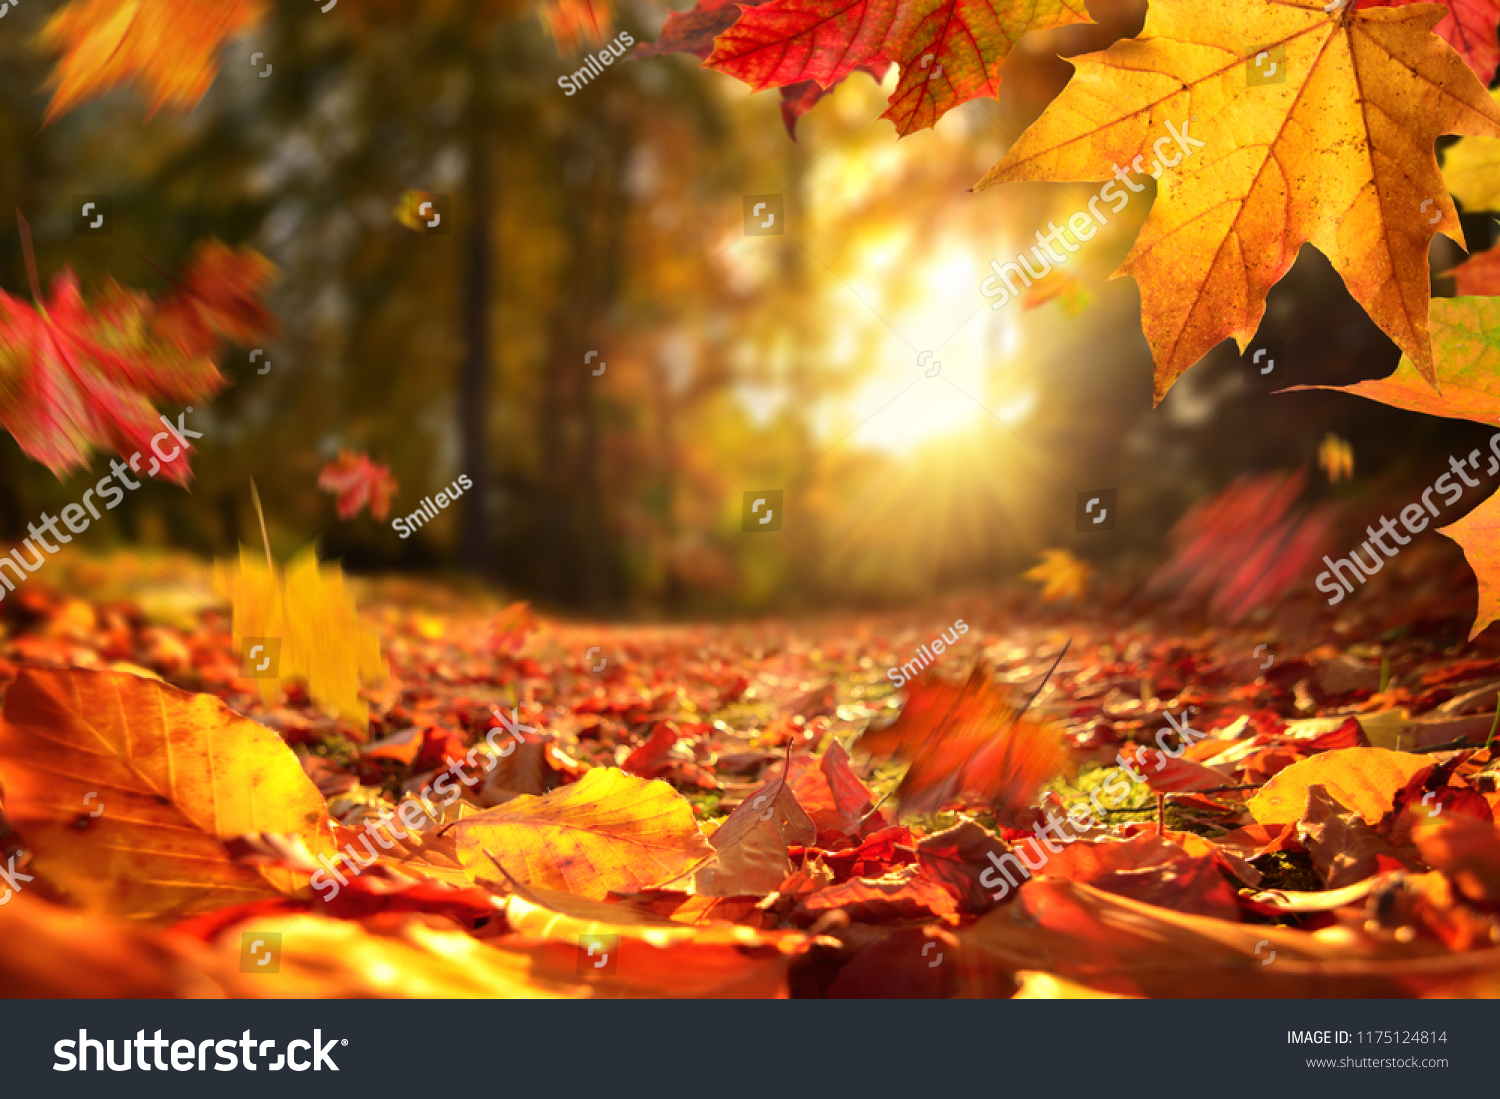 772680 Falls Scene Images Stock Photos And Vectors Shutterstock